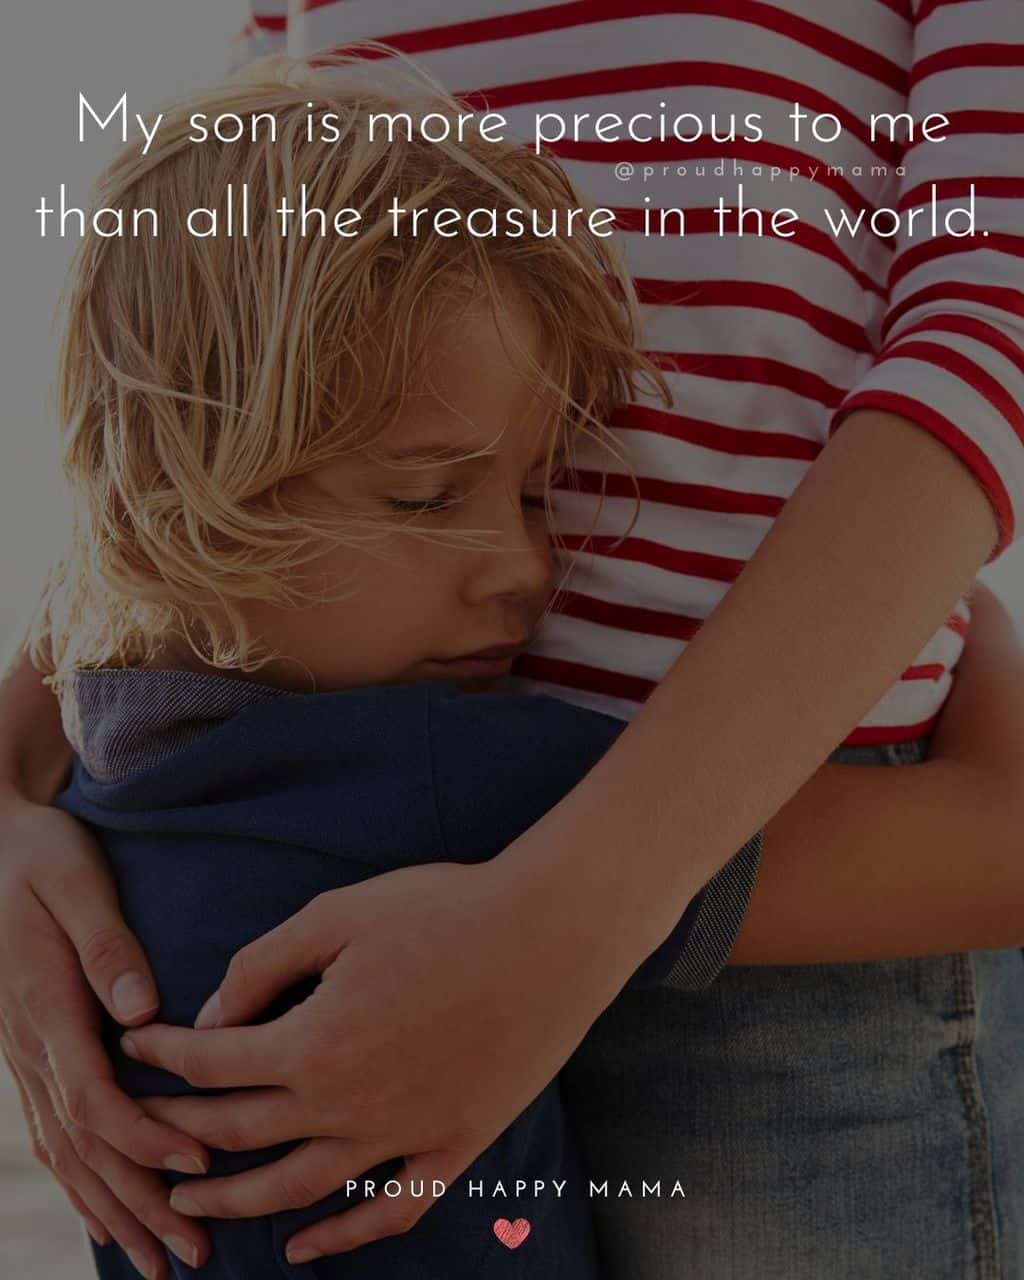 Son Quotes - My son is more precious to me than all the treasure in the world.’